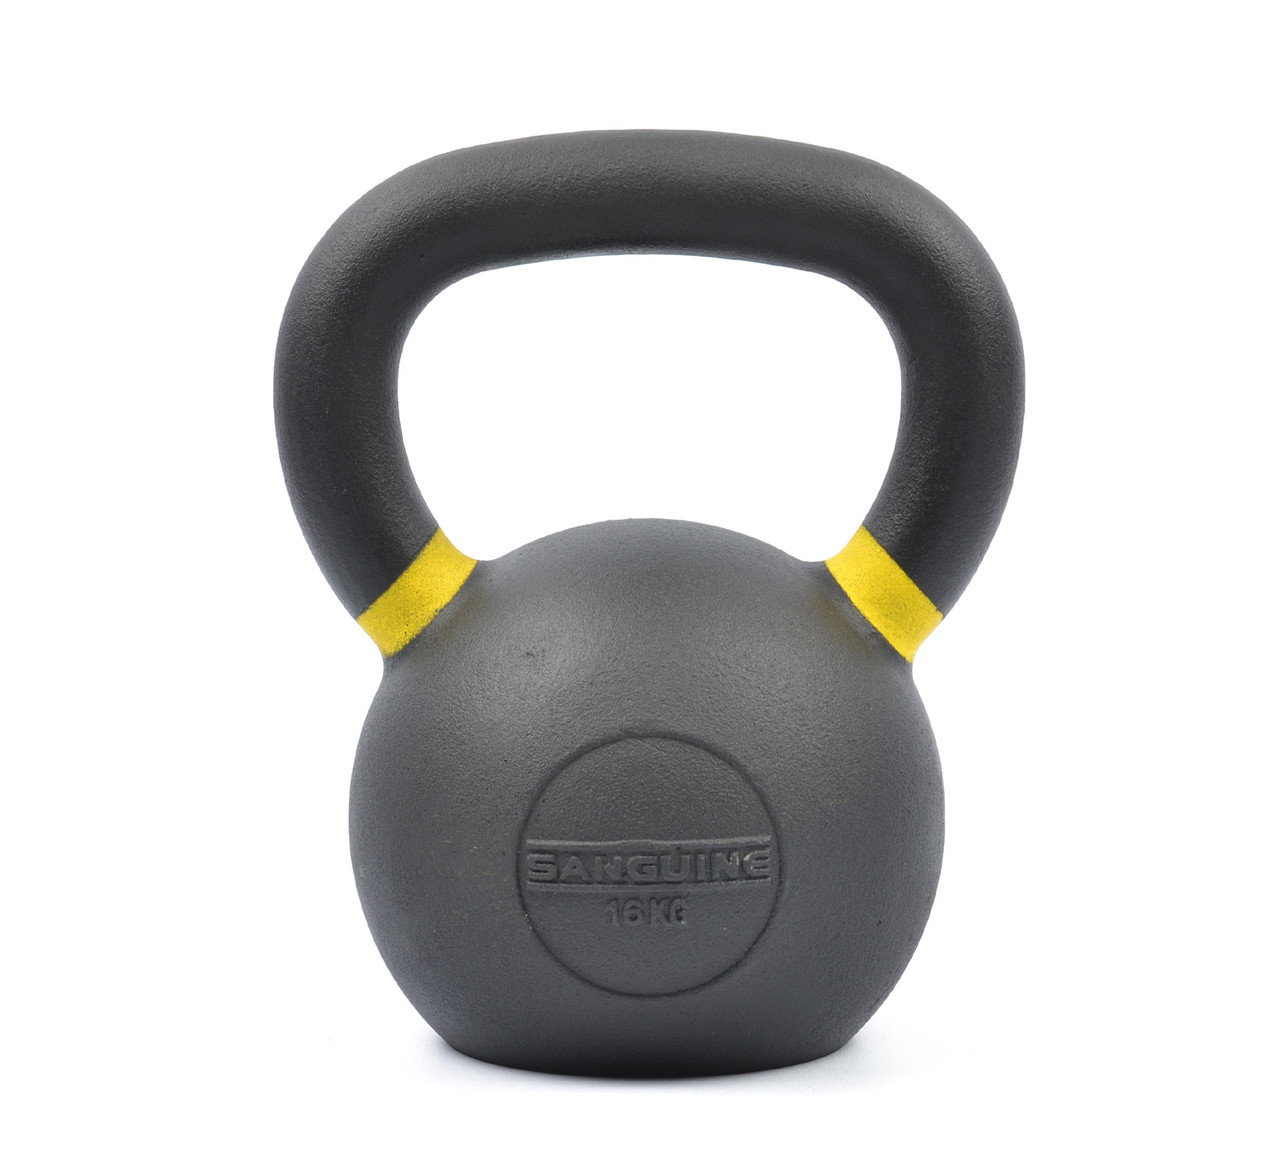 Buy Strauss Kettlebell, Black, (6 Kg) Online at Low Prices in India